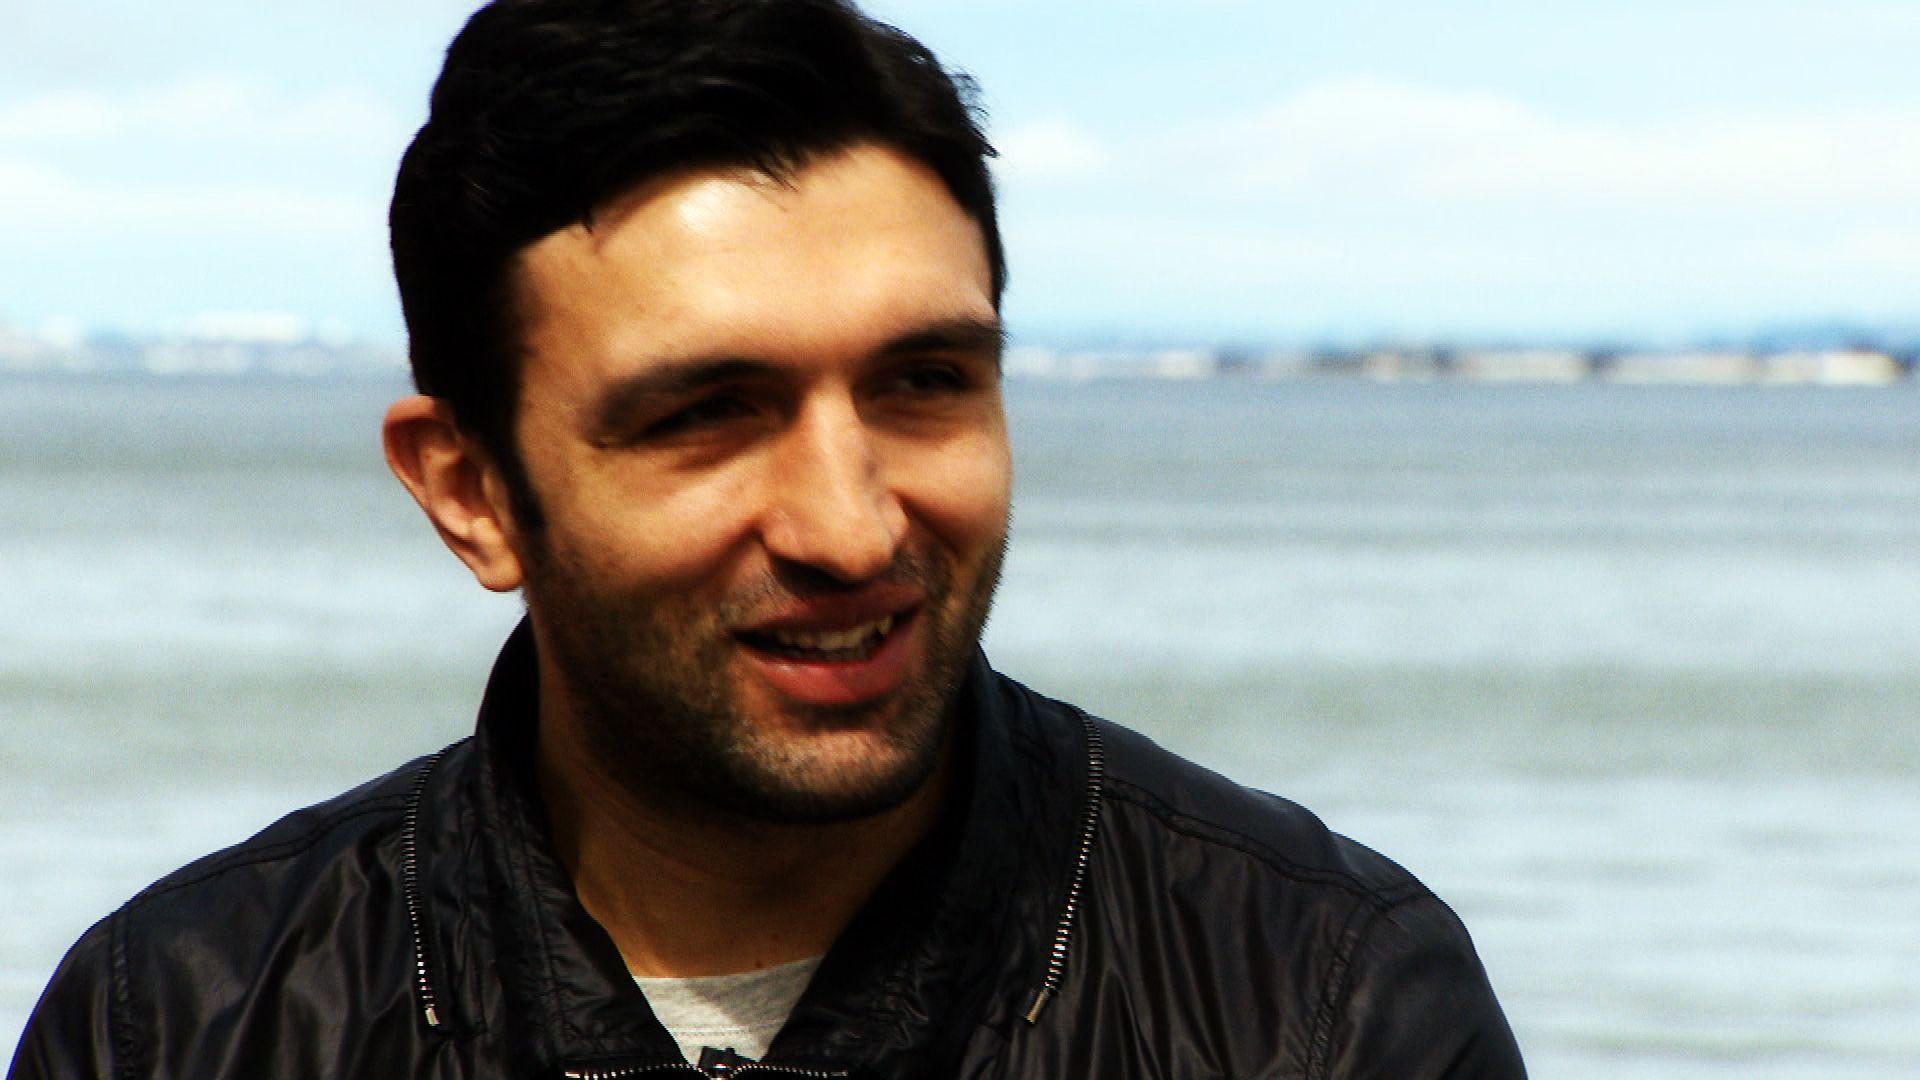 Warriors Central: The journey and passions of Zaza Pachulia